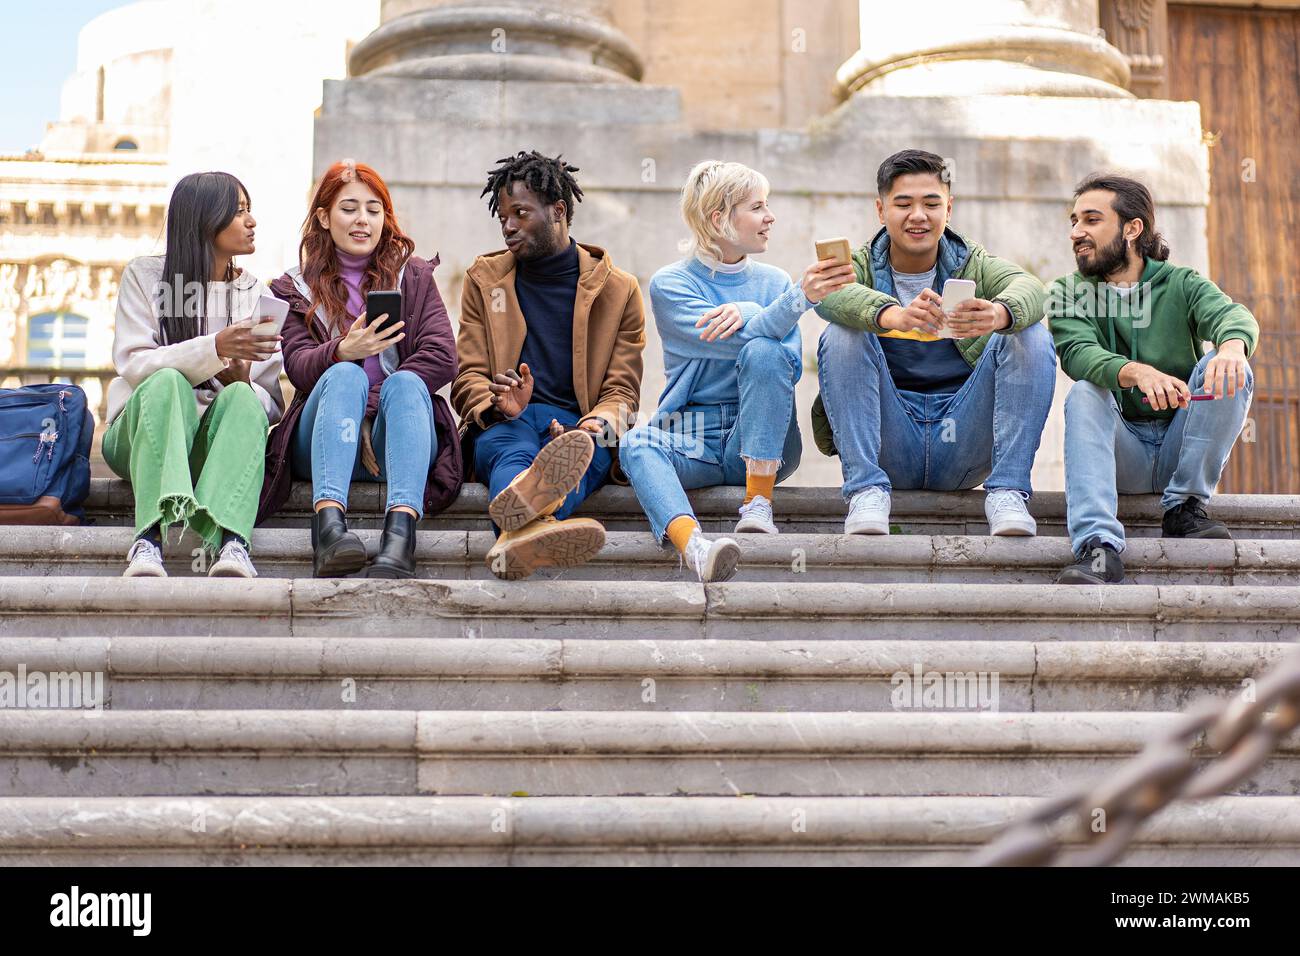 Group of young adults engaged in conversation while sharing content on smartphones, reflecting a relaxed urban lifestyle. Stock Photo